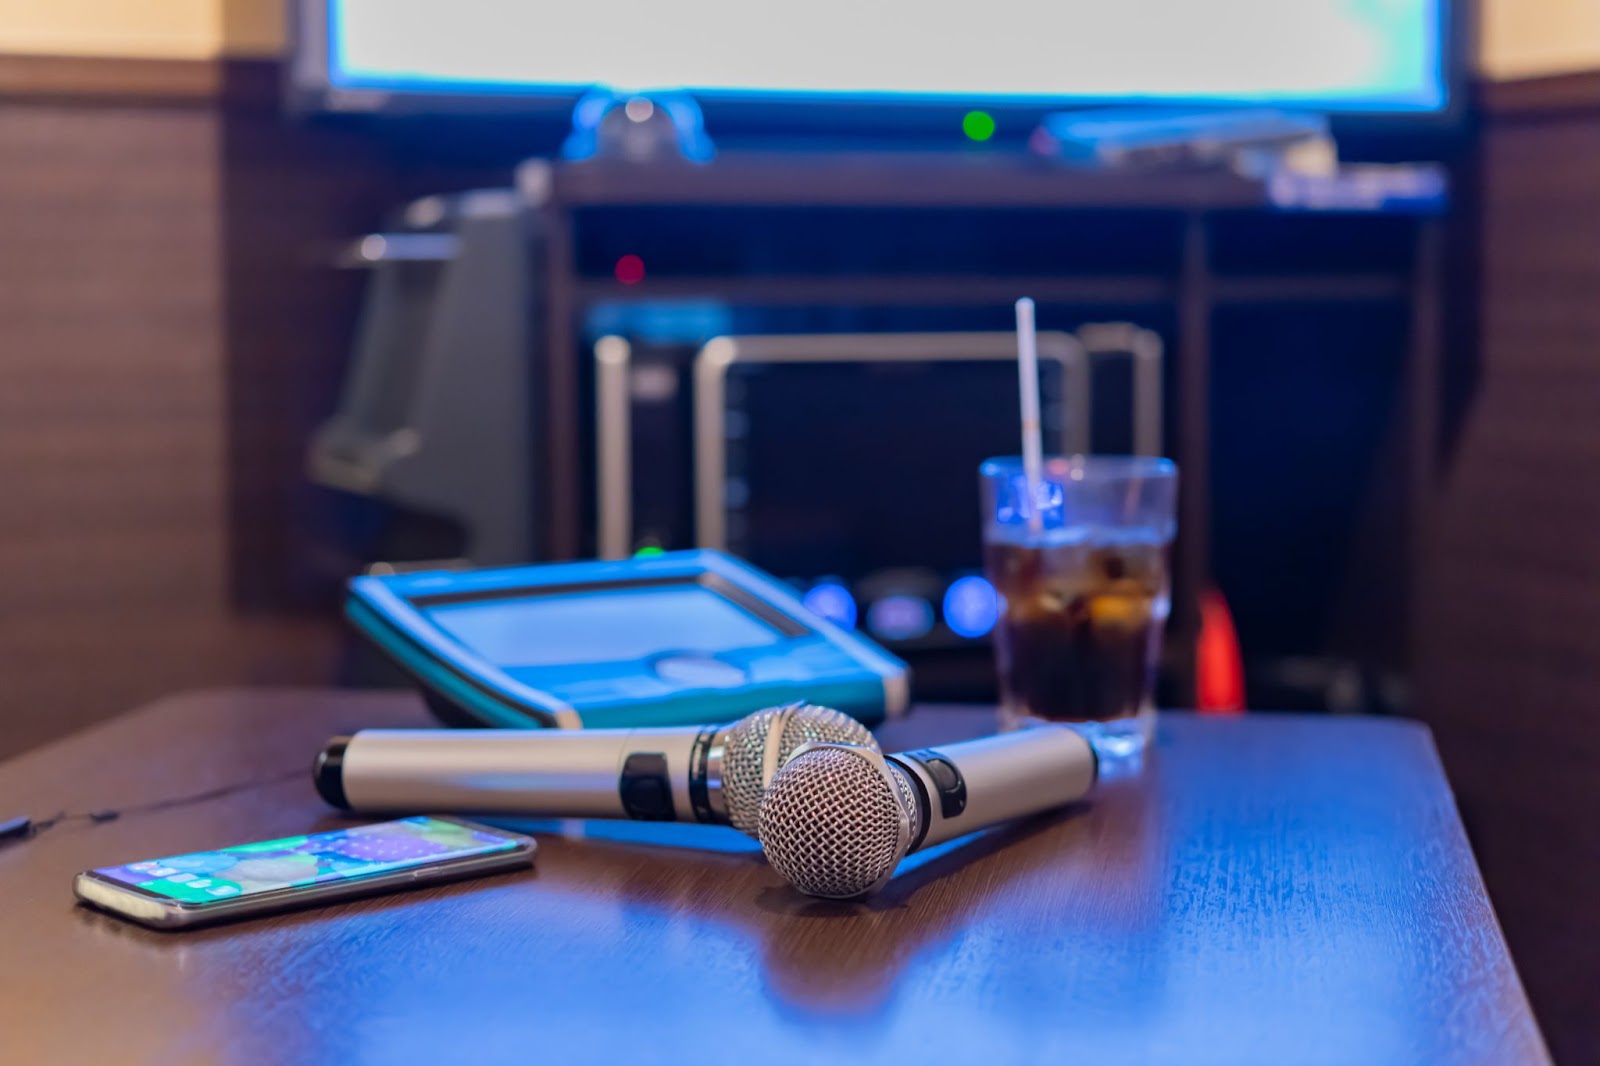 Two microphones on a table next to a cell phone, a drink, and a karaoke machine.